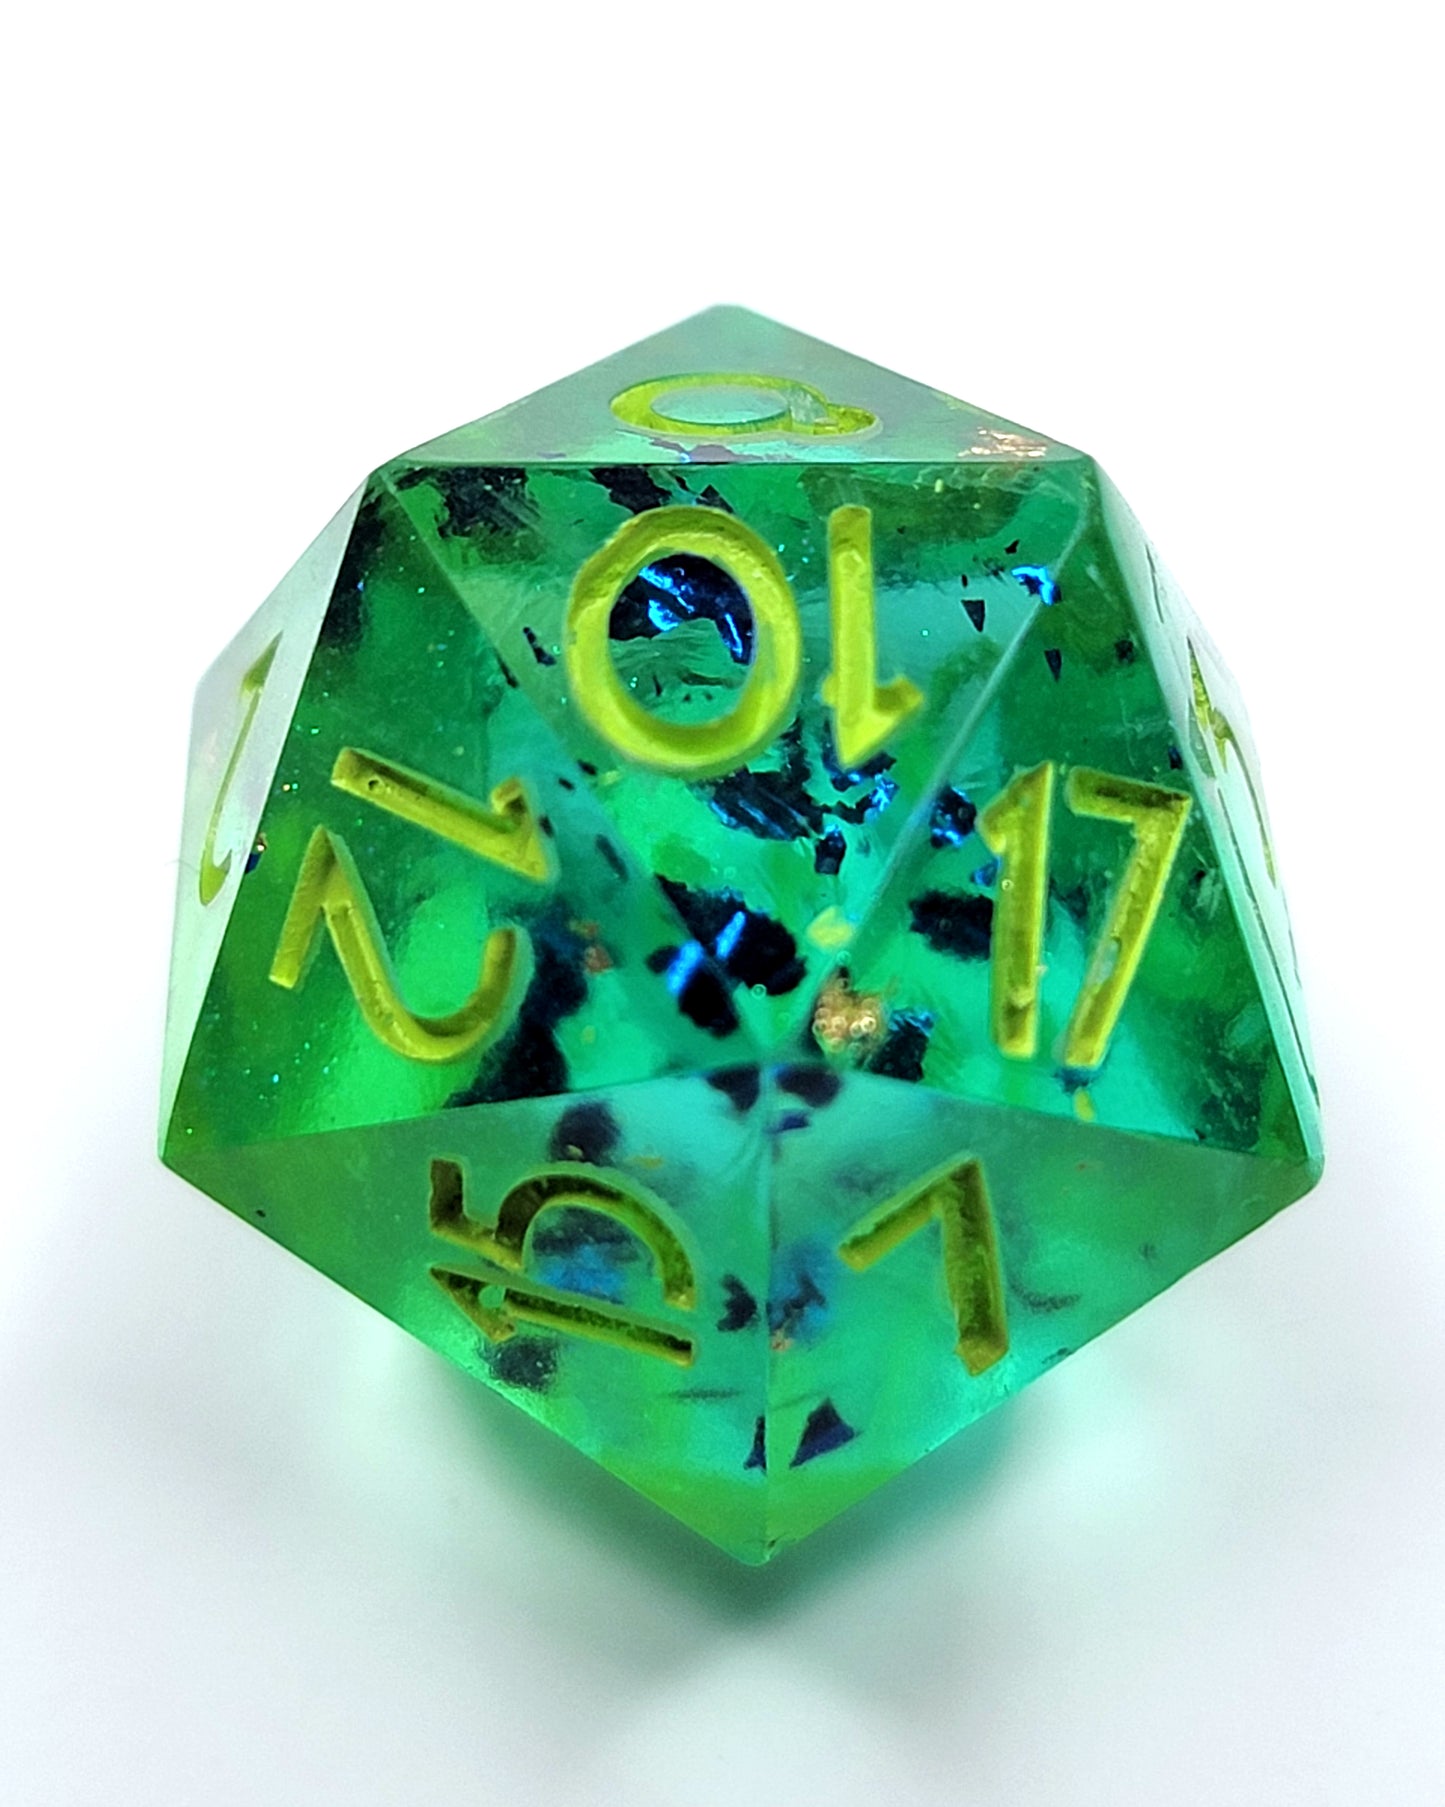 Mermaid Heart -1 D20 | Handmade Dice | Hand Crafted Dungeons and Dragons Dice